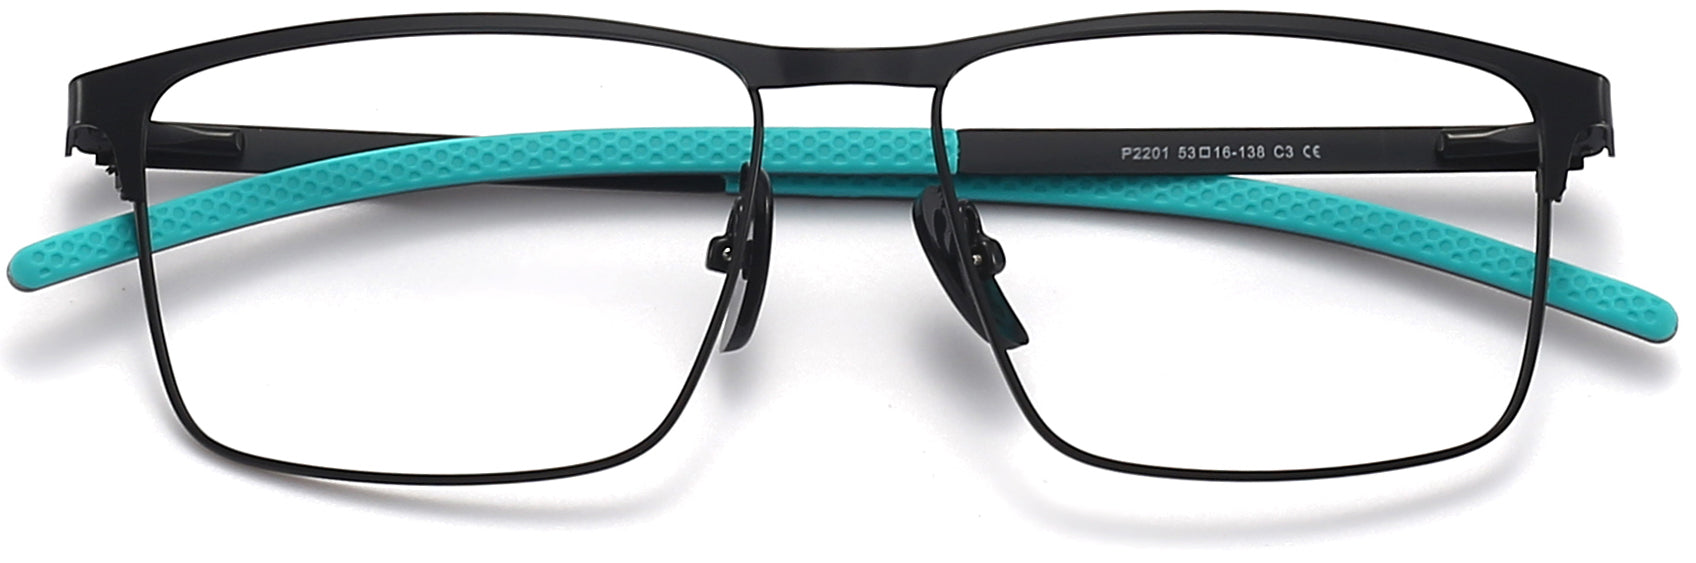 Harry Square Black Eyeglasses from ANRRI, closed view